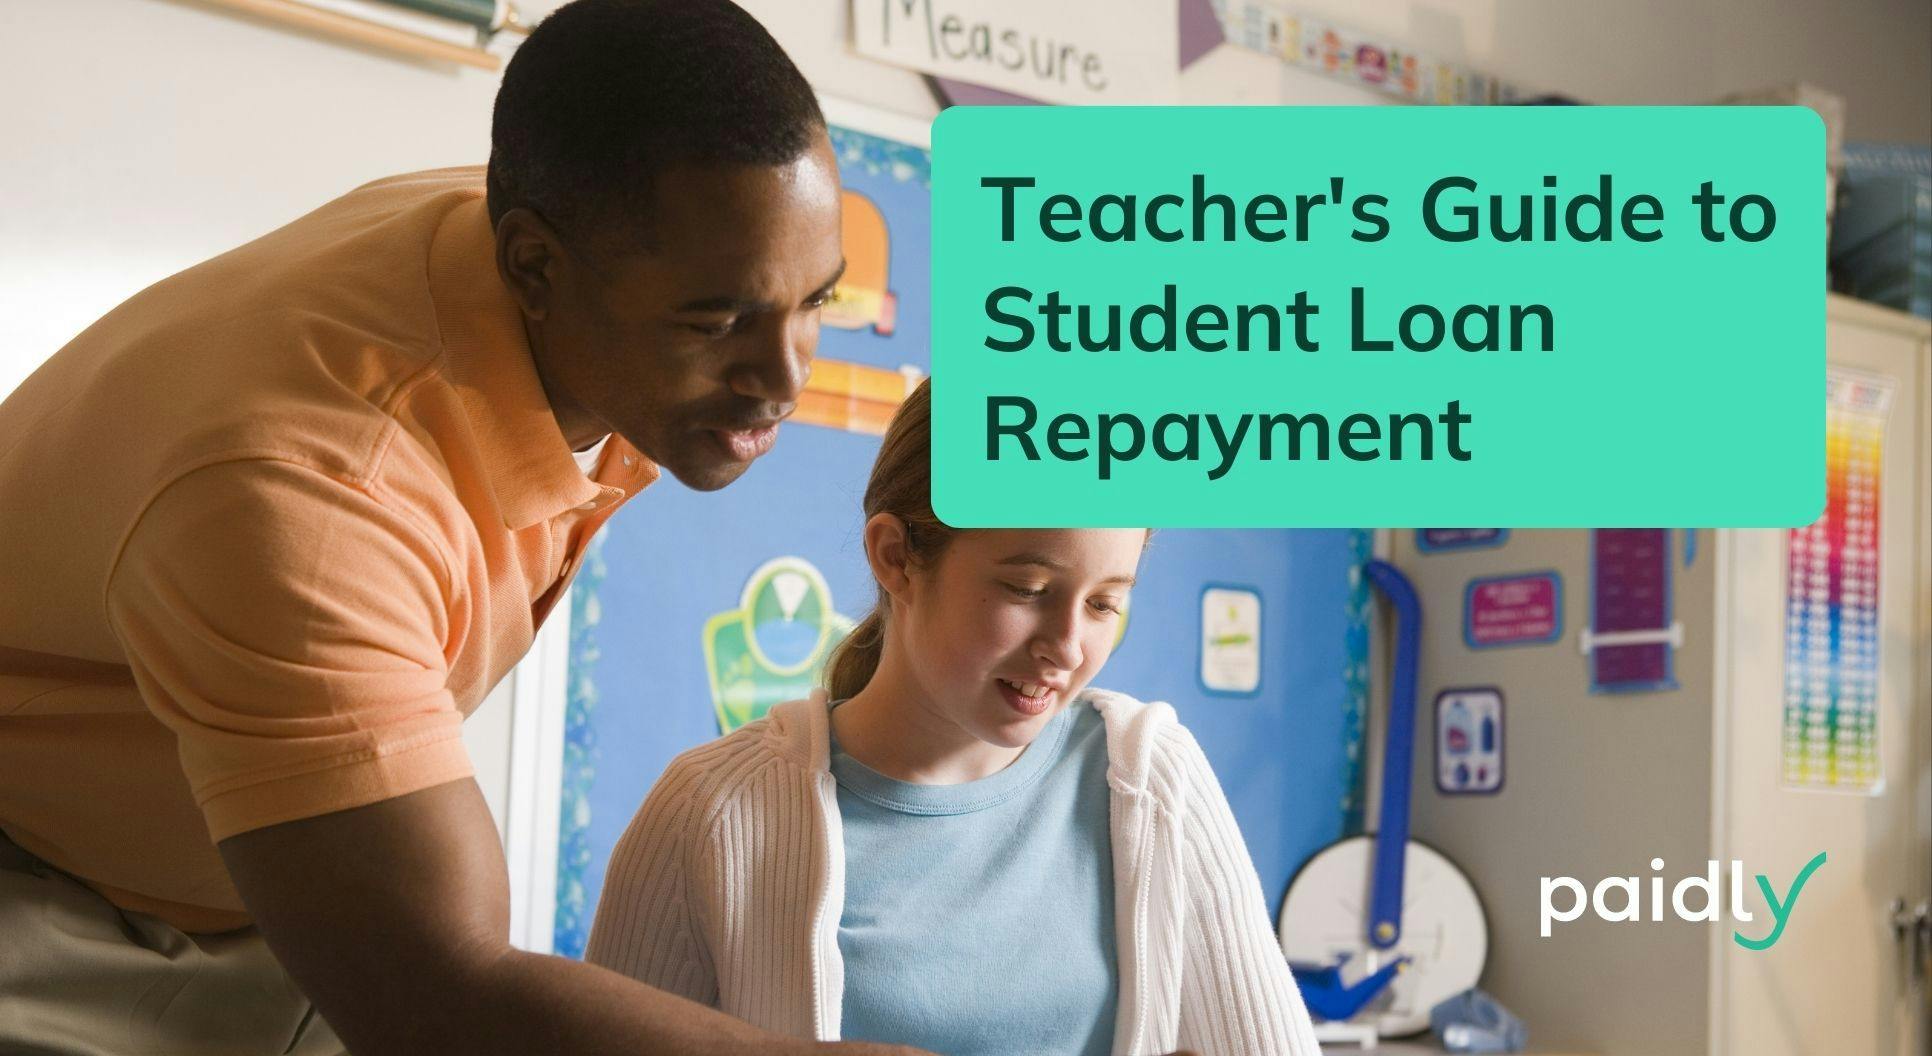 Teacher with student loan repayments helping a student